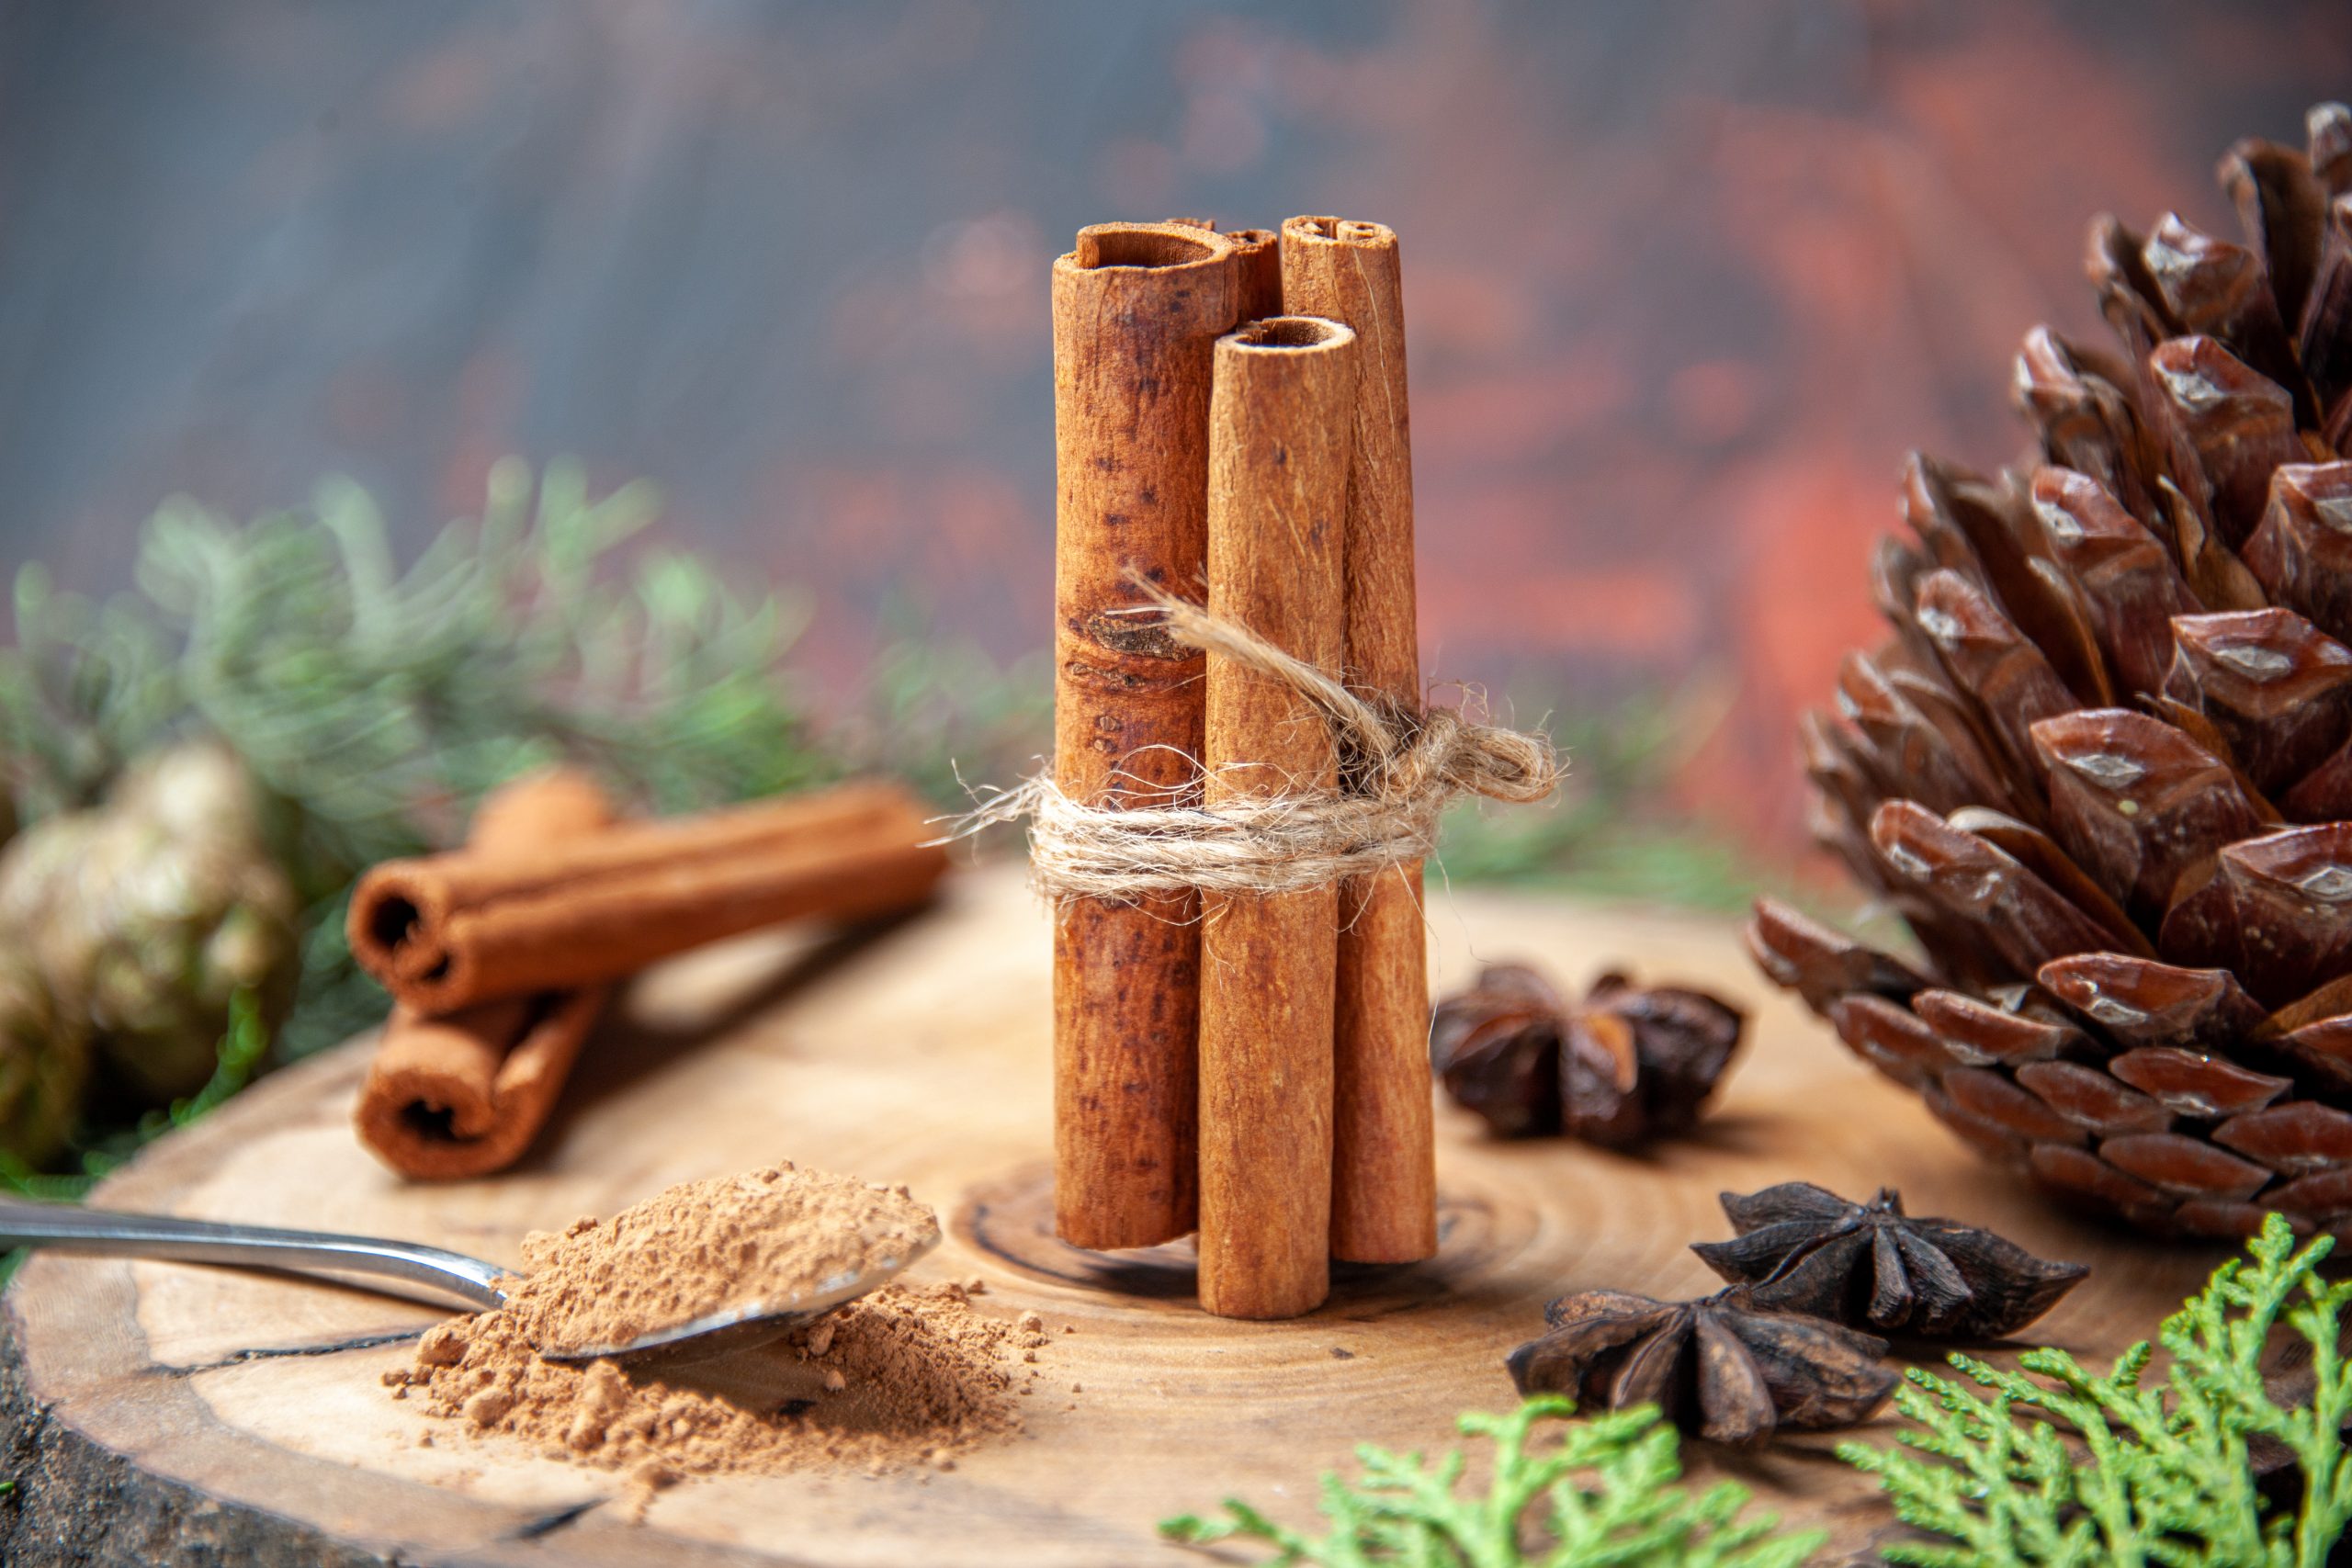 Guide to Proper Storage and Long-Term Use of Organic Cinnamon